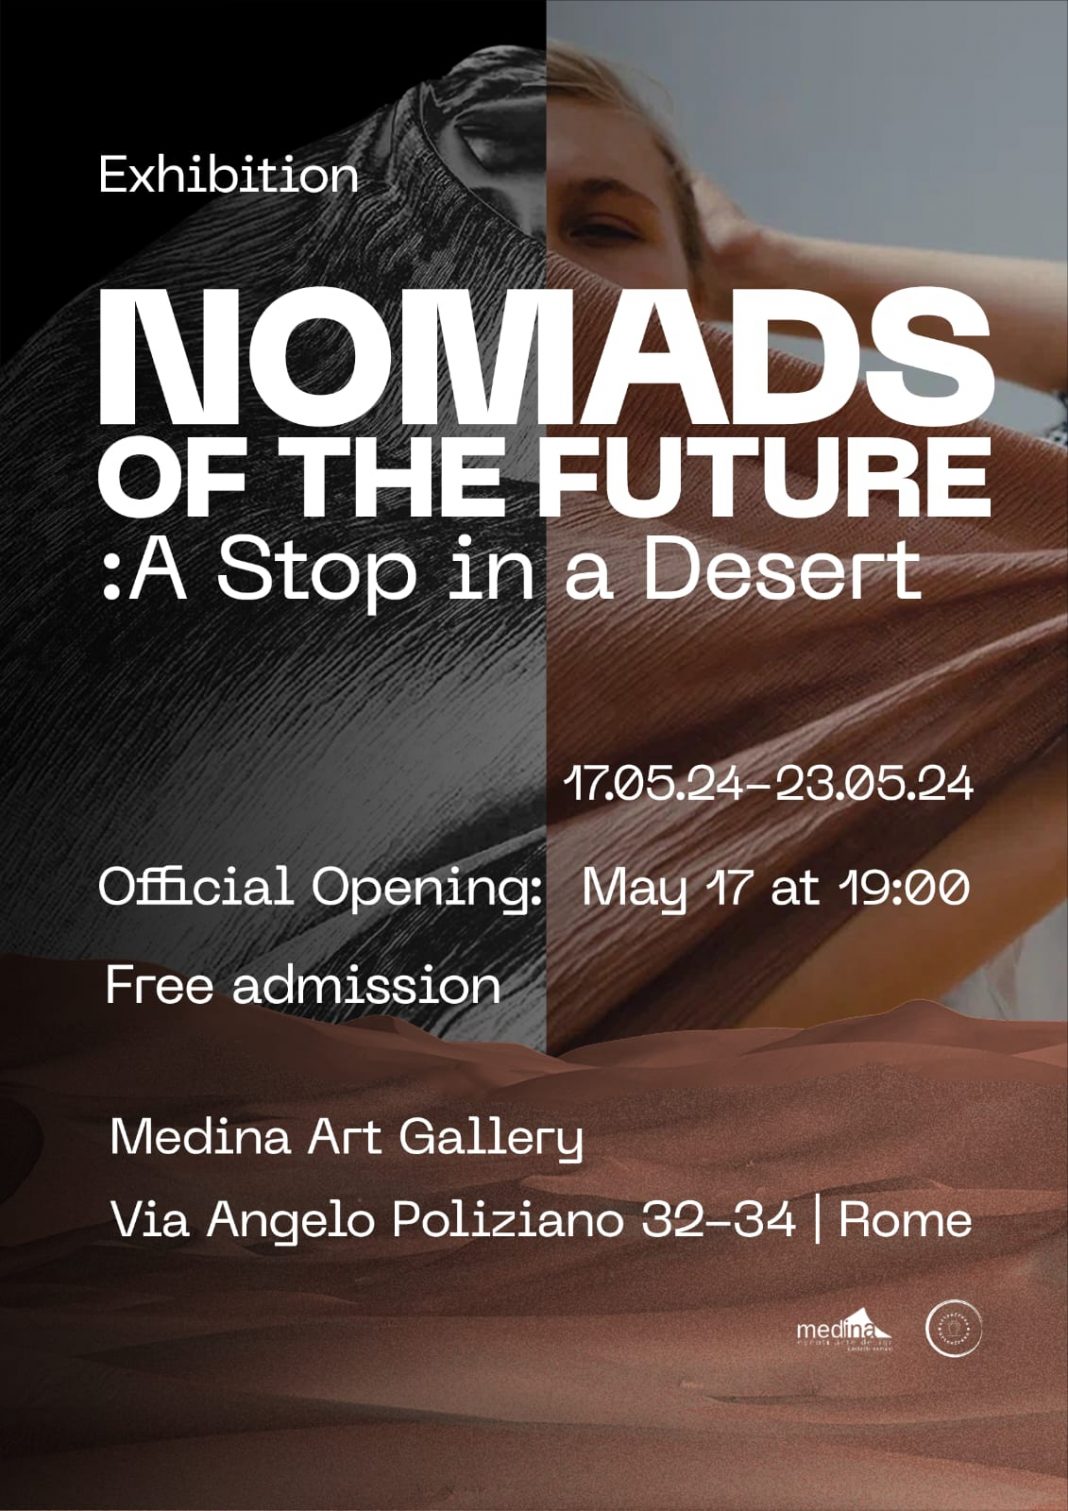 INTERNATIONAL EXHIBITION NOMADS OF THE FUTURE – A Stop in the Deserthttps://www.exibart.com/repository/media/formidable/11/img/e8a/f746b184-7ae8-4fdf-85a7-d5d2eac5b5e3-1068x1511.jpg